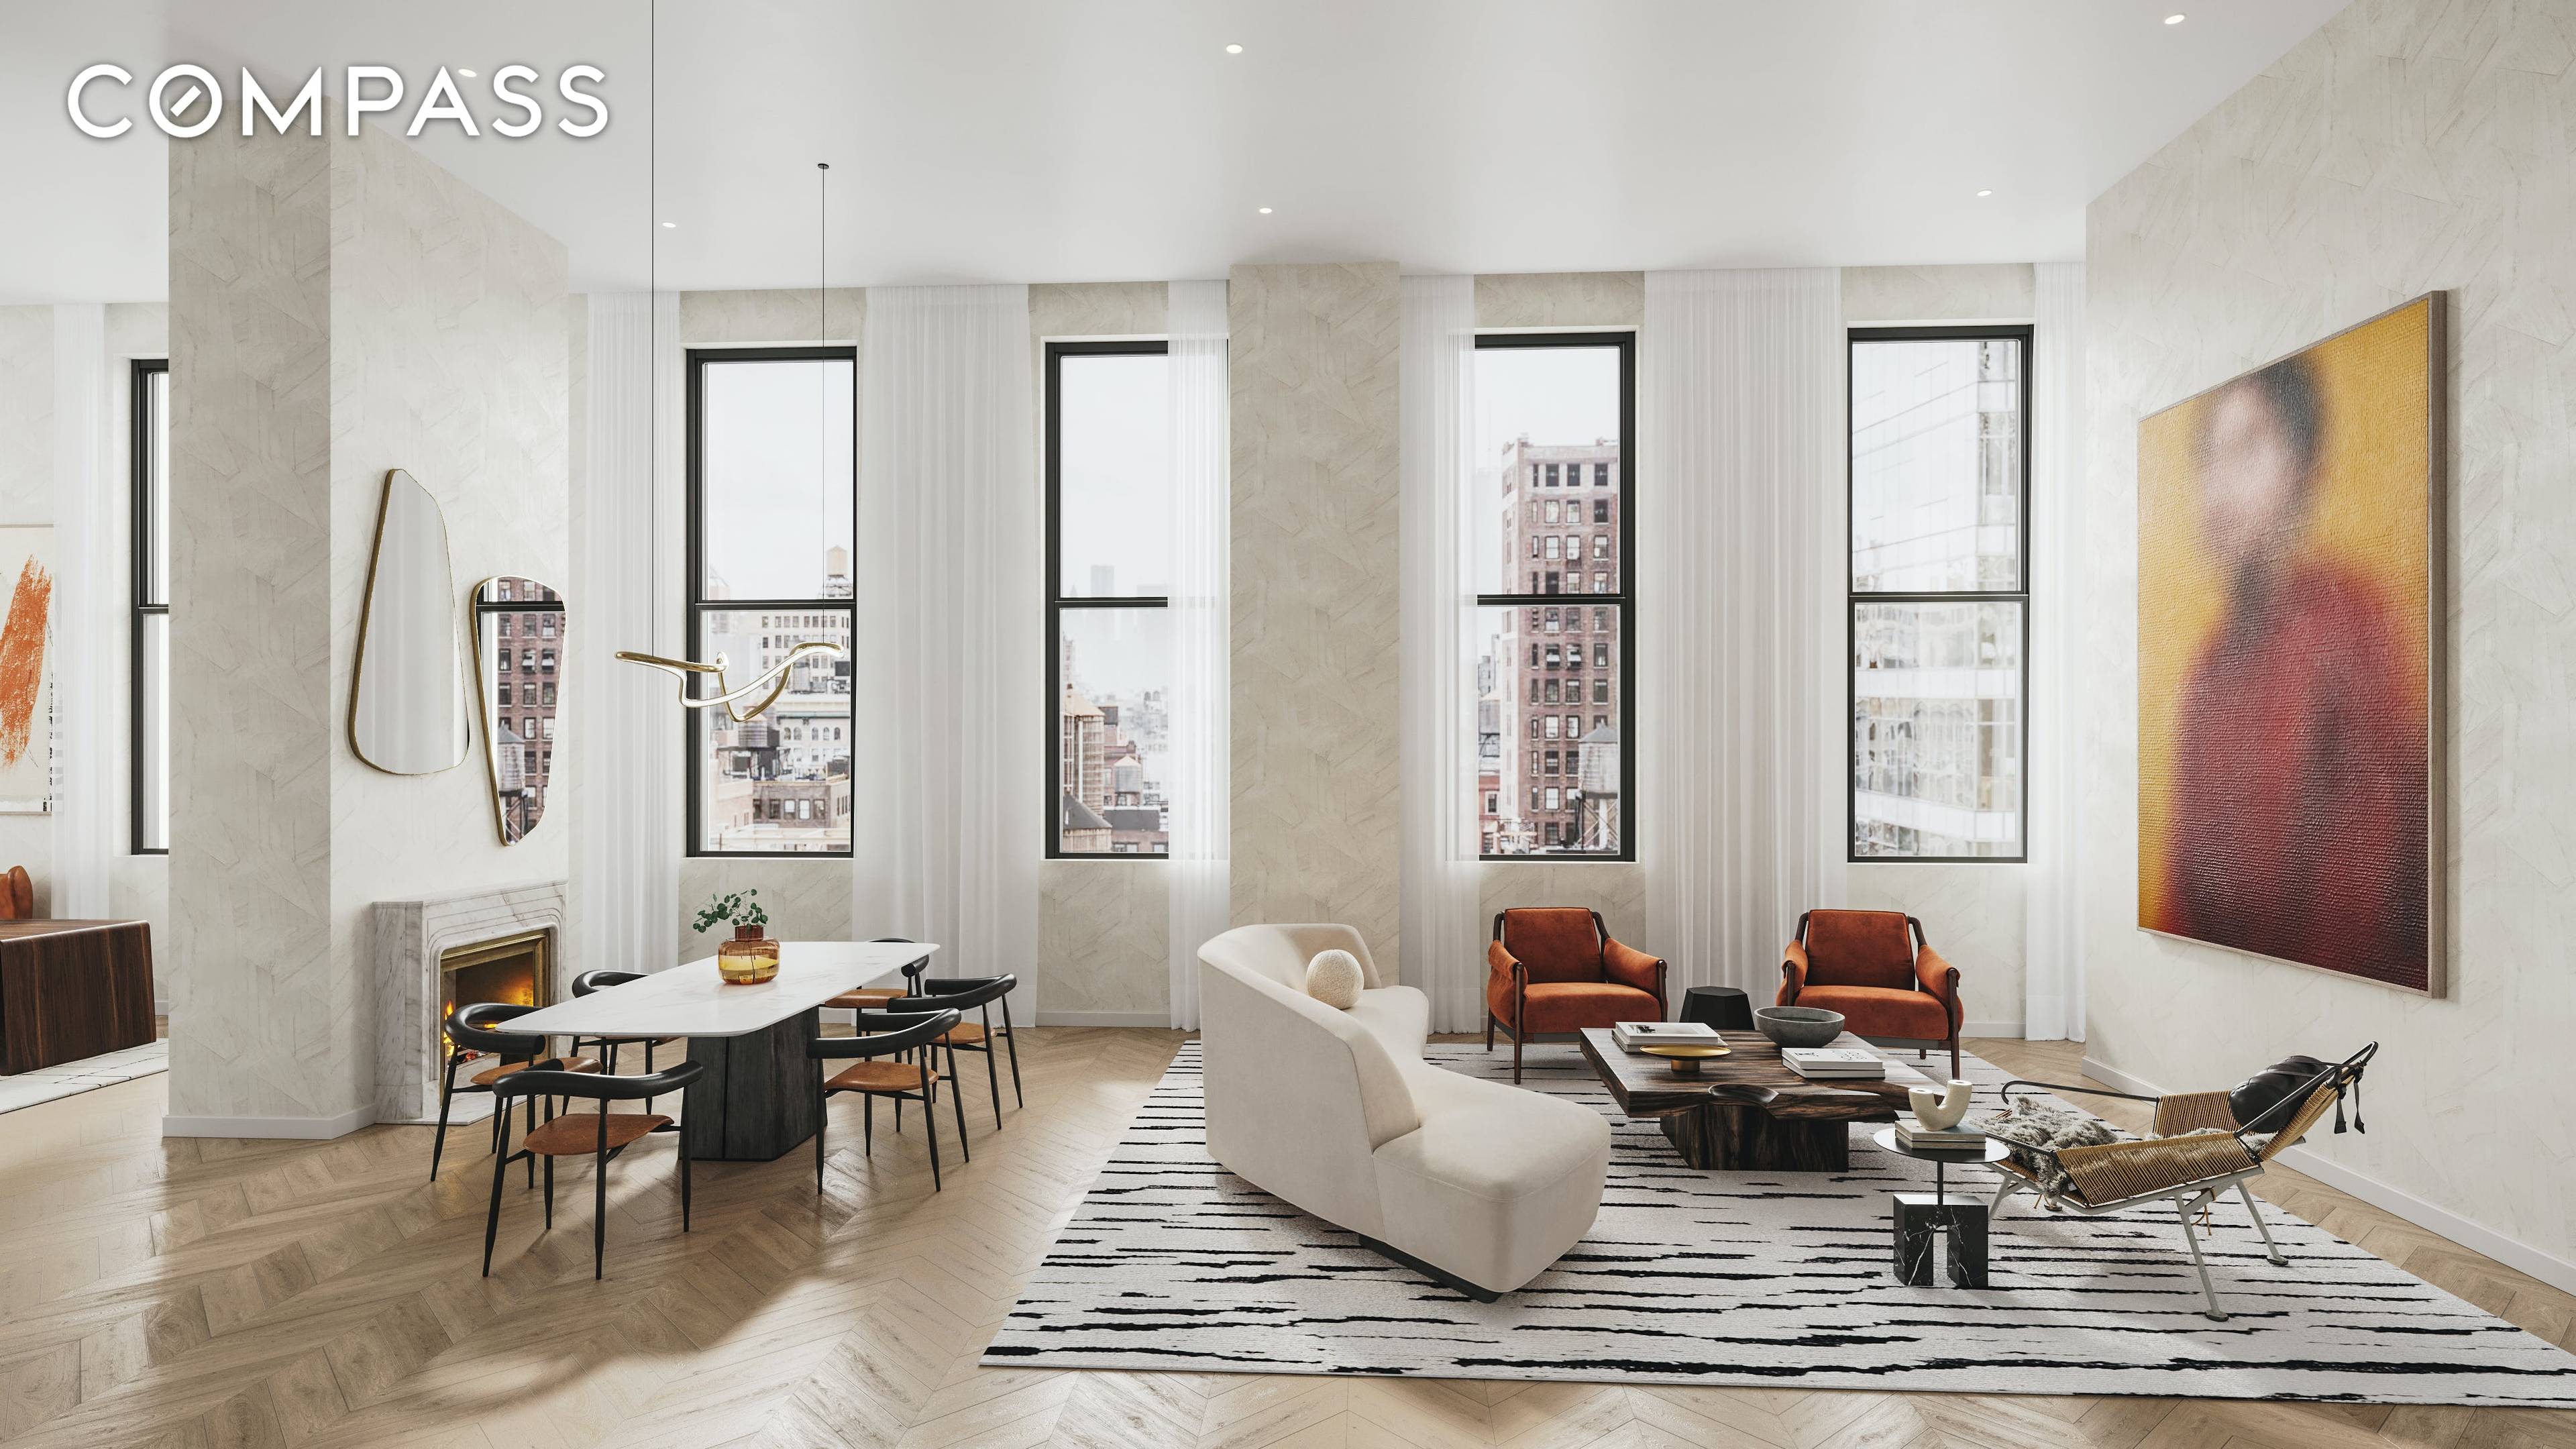 A once in a lifetime opportunity to create a trophy penthouse in the Greenwich Village Soho neighborhood.